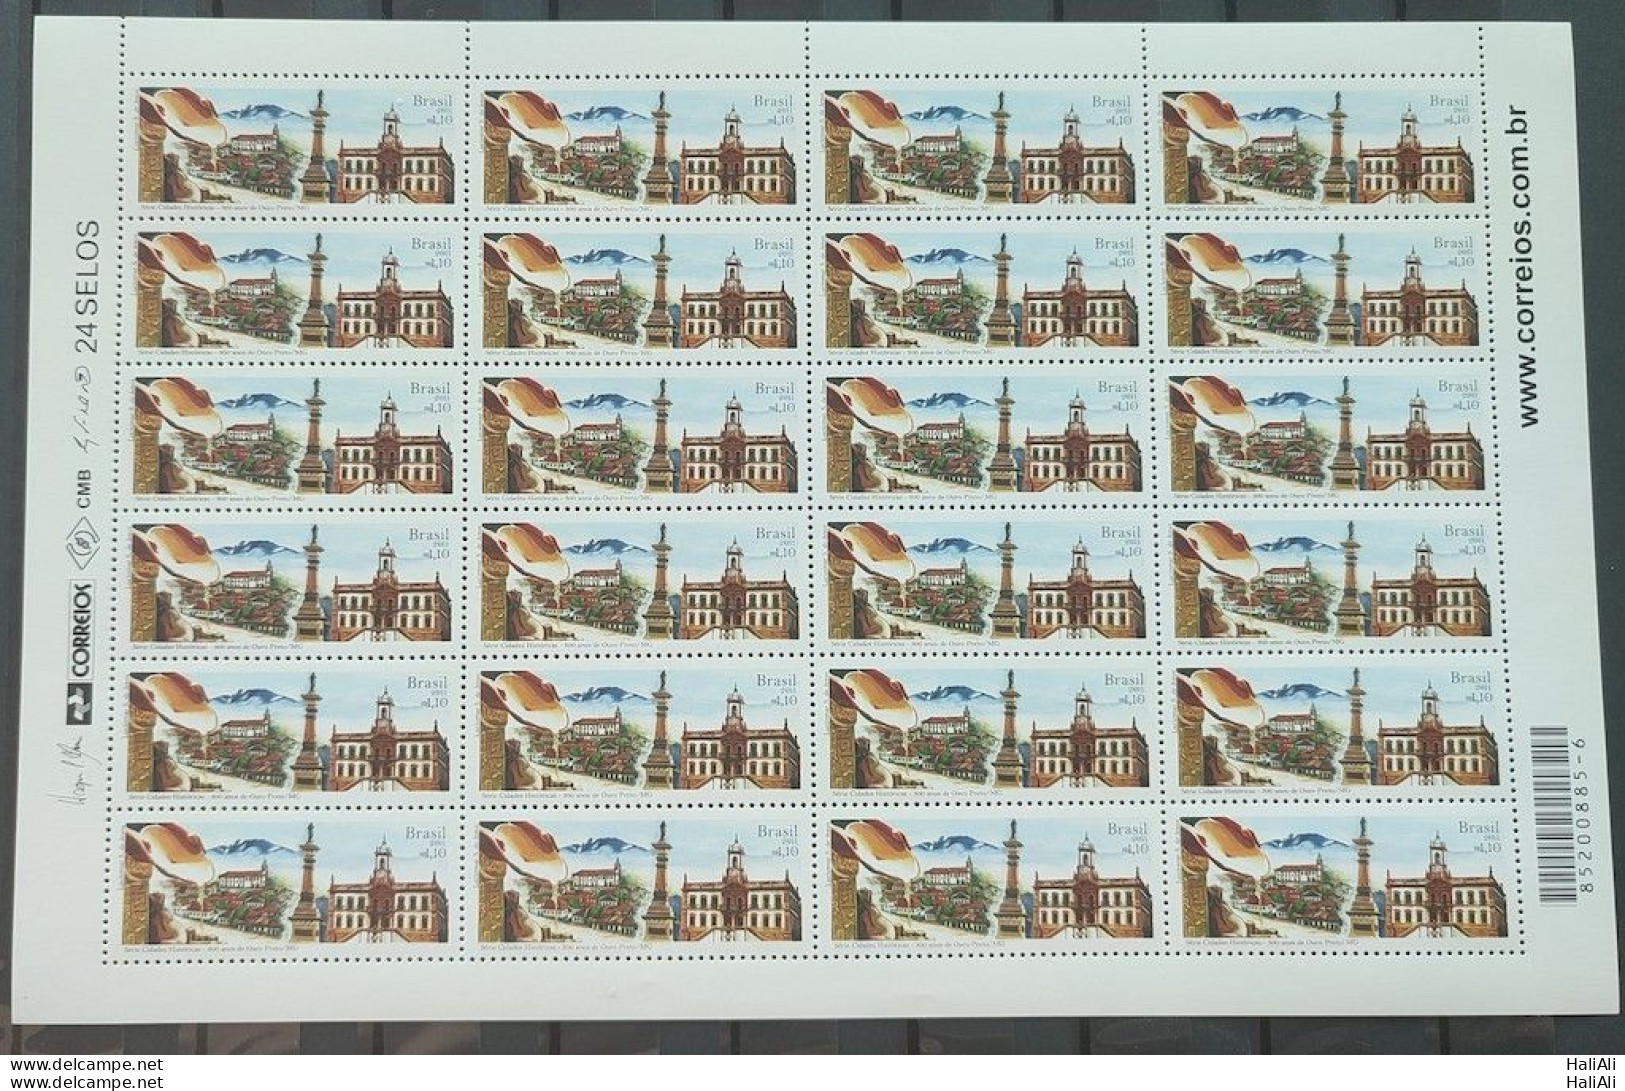 C 3097 Brazil Stamp Historical Cities Ouro Preto MG 2011 Sheet - Unused Stamps